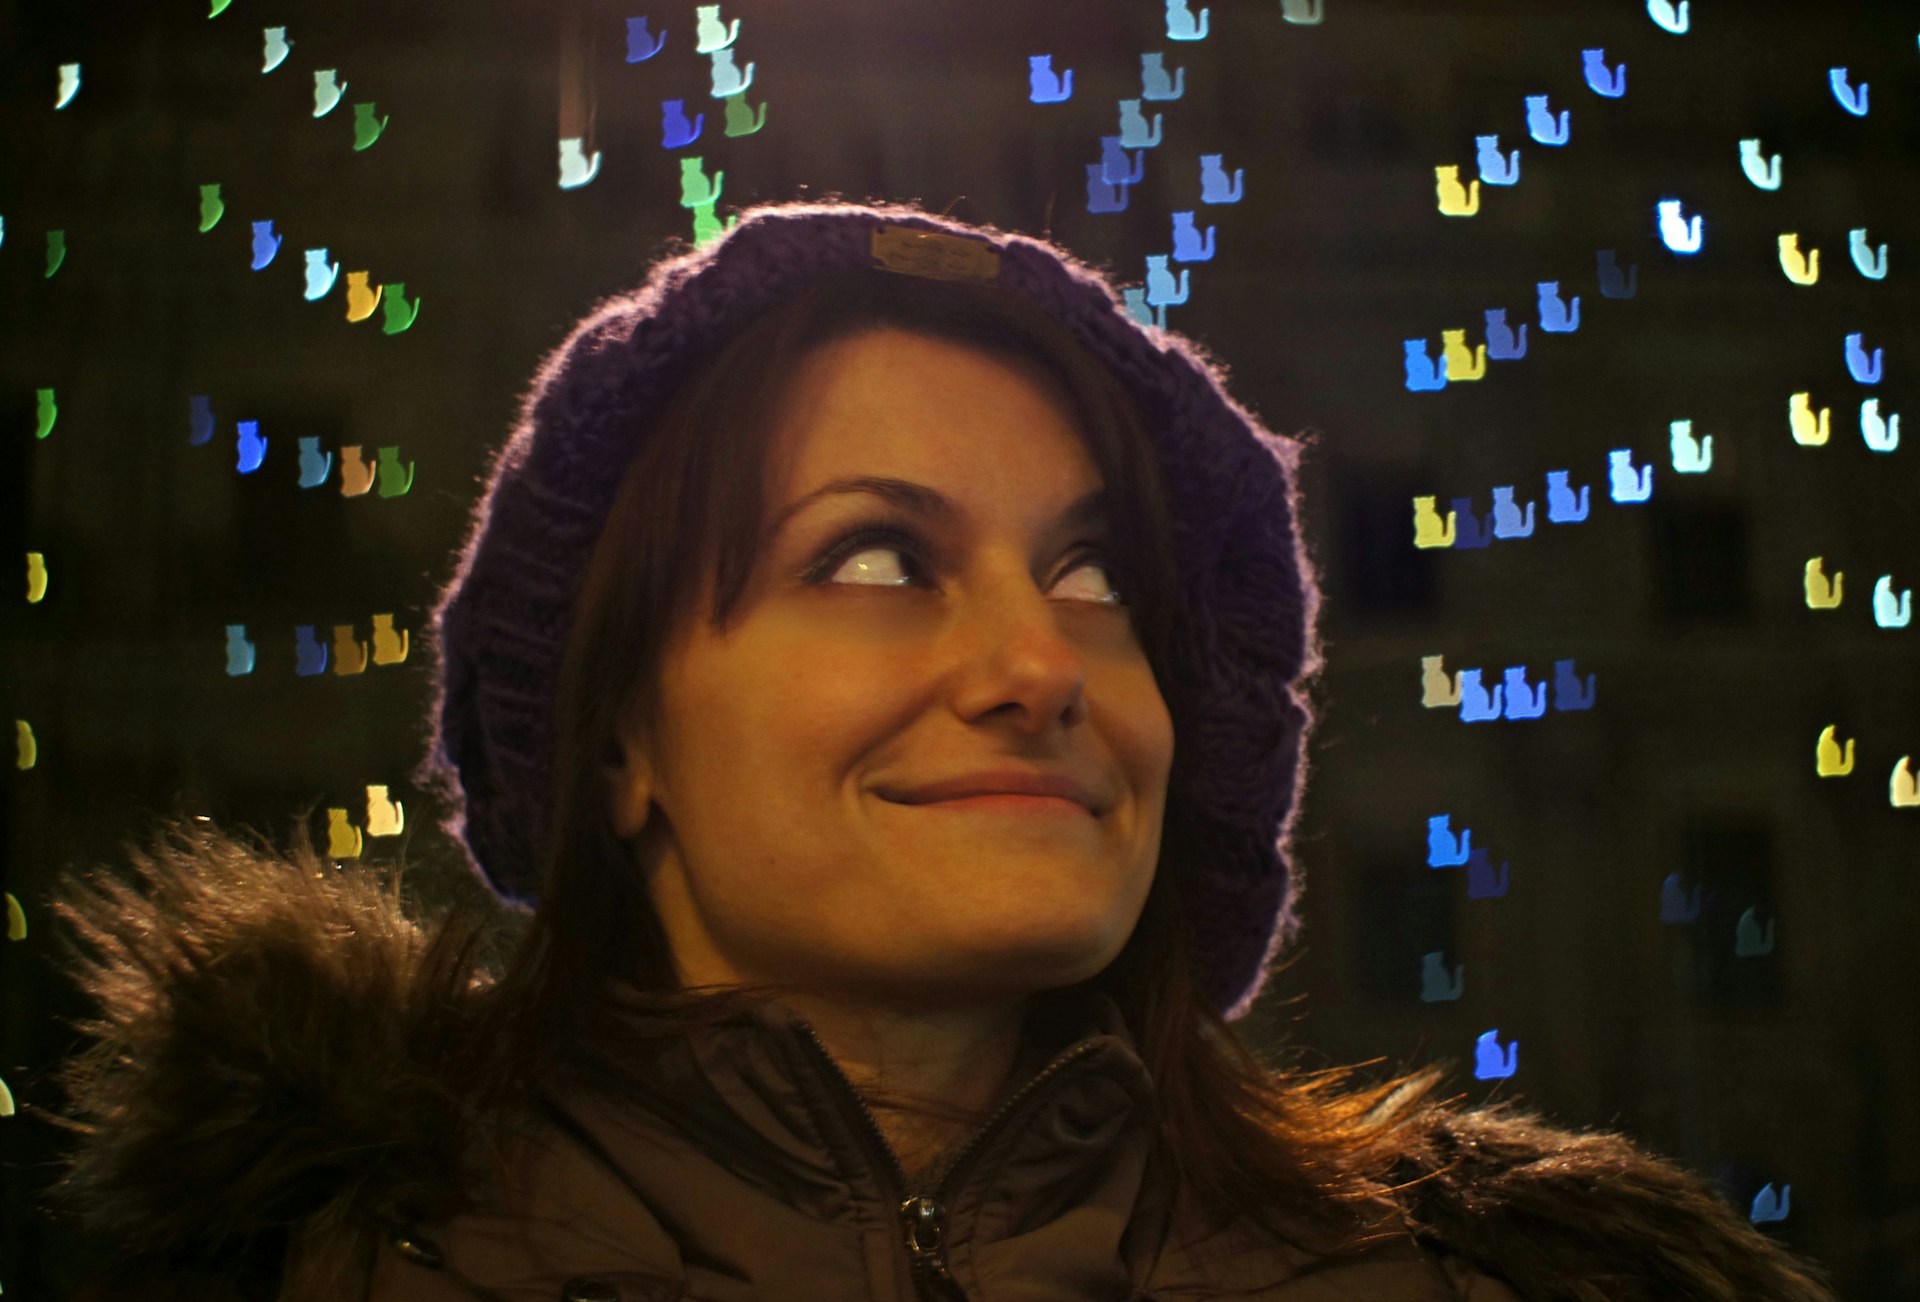 A woman smiles surrounded by Christmas lights in Zürich